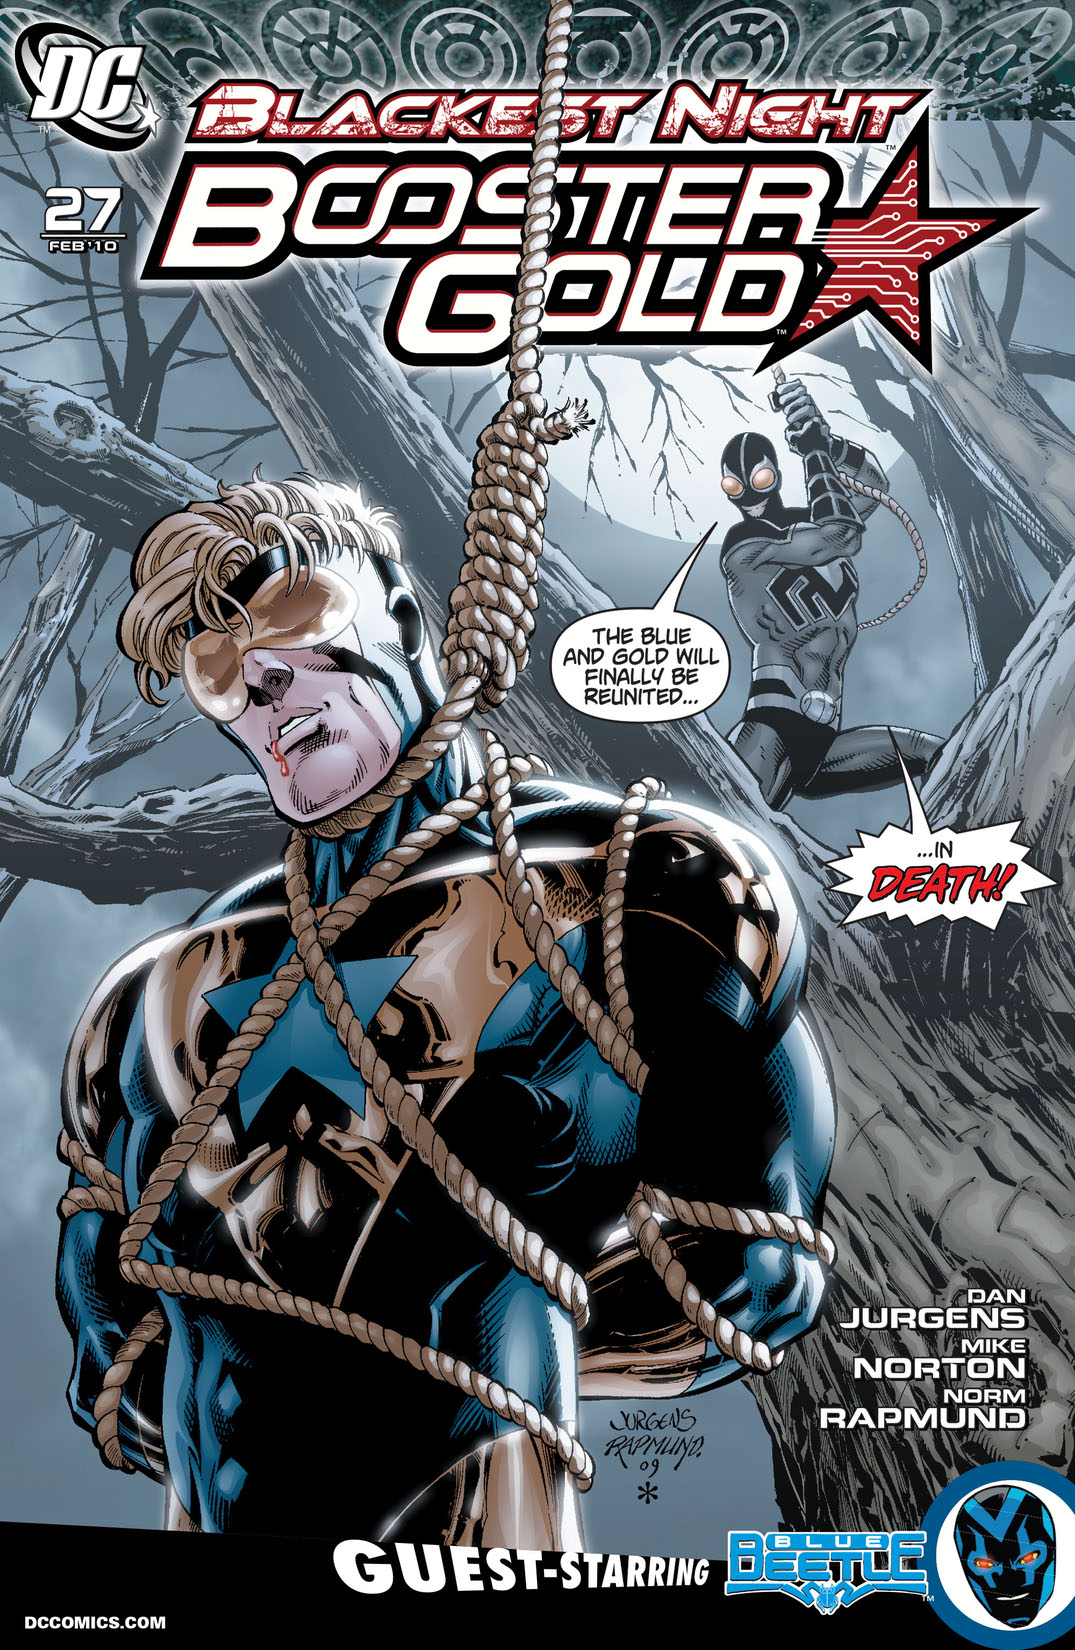 Booster Gold (2007-) #27 preview images